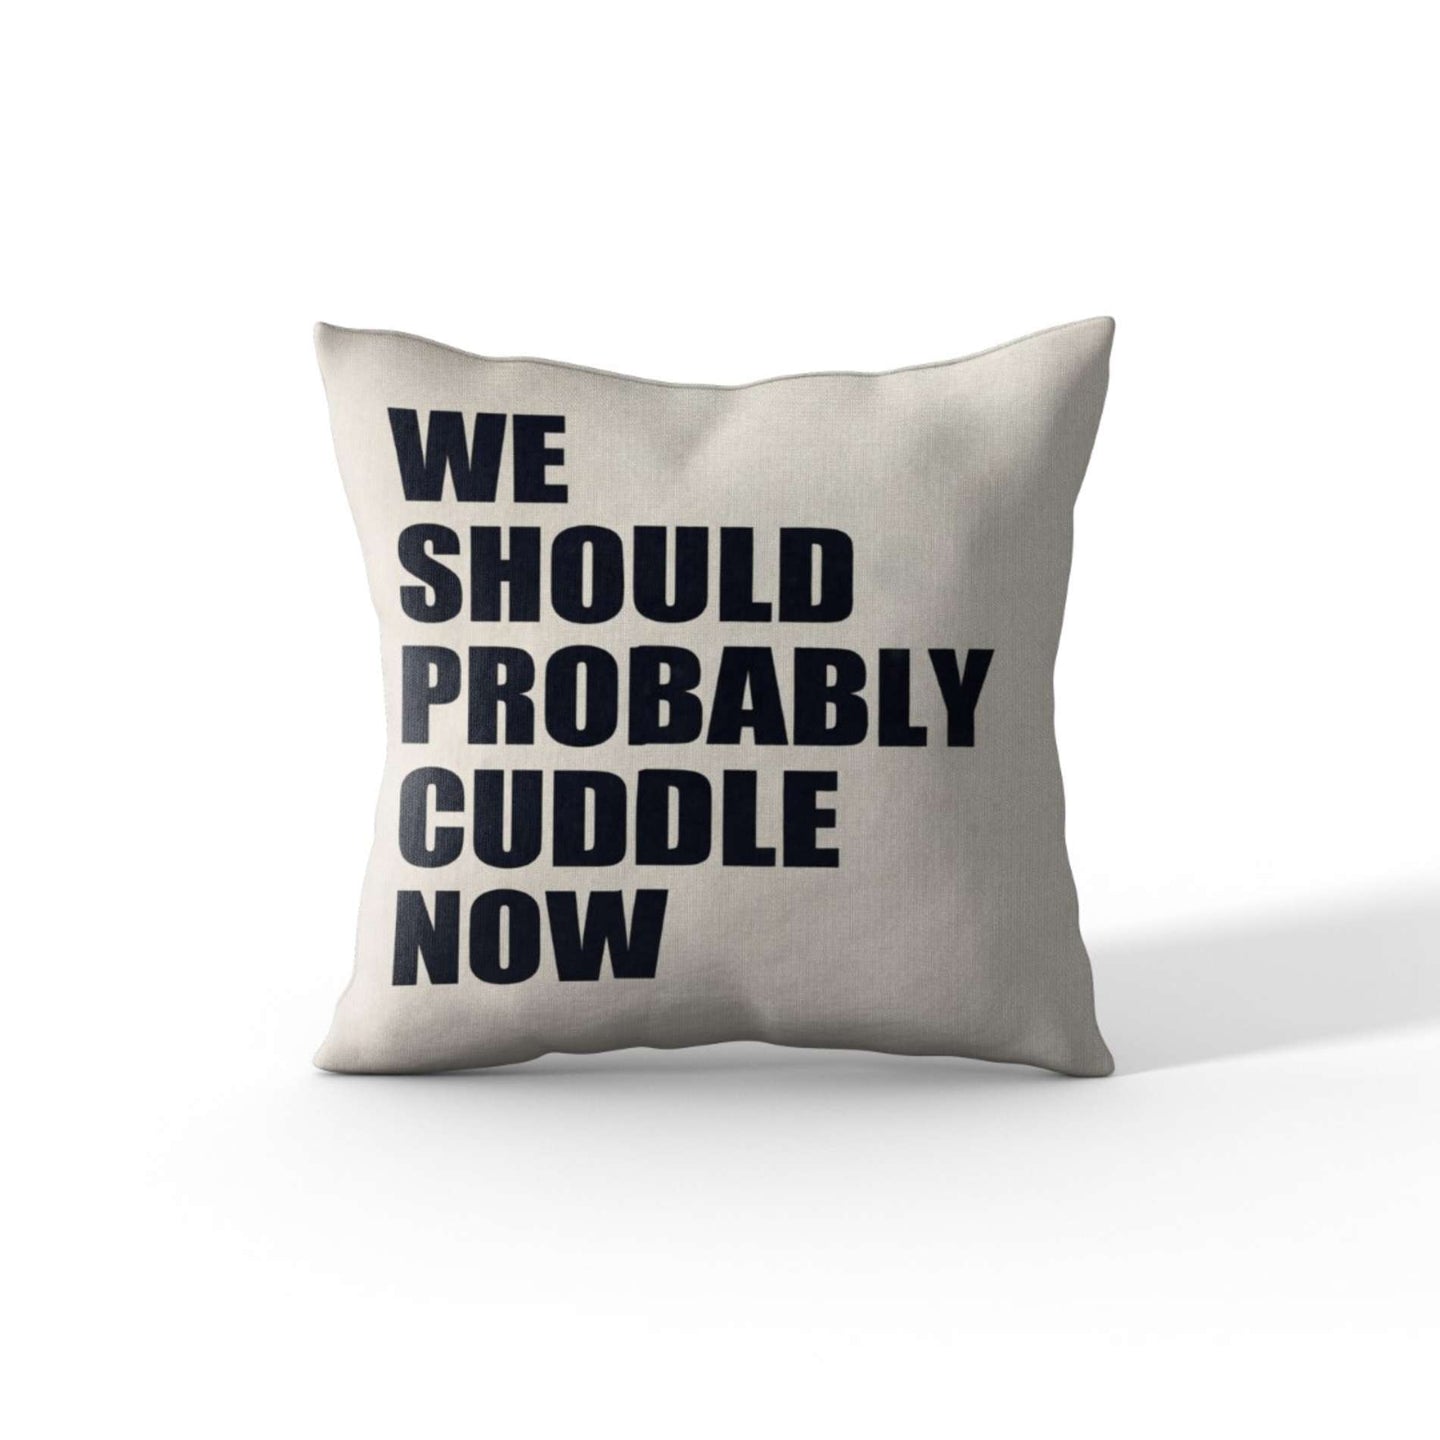 Cortesi Home 'We Should Probably Cuddle Now' by Nicklas Gustafsson, Decorative Soft Velvet Square 18